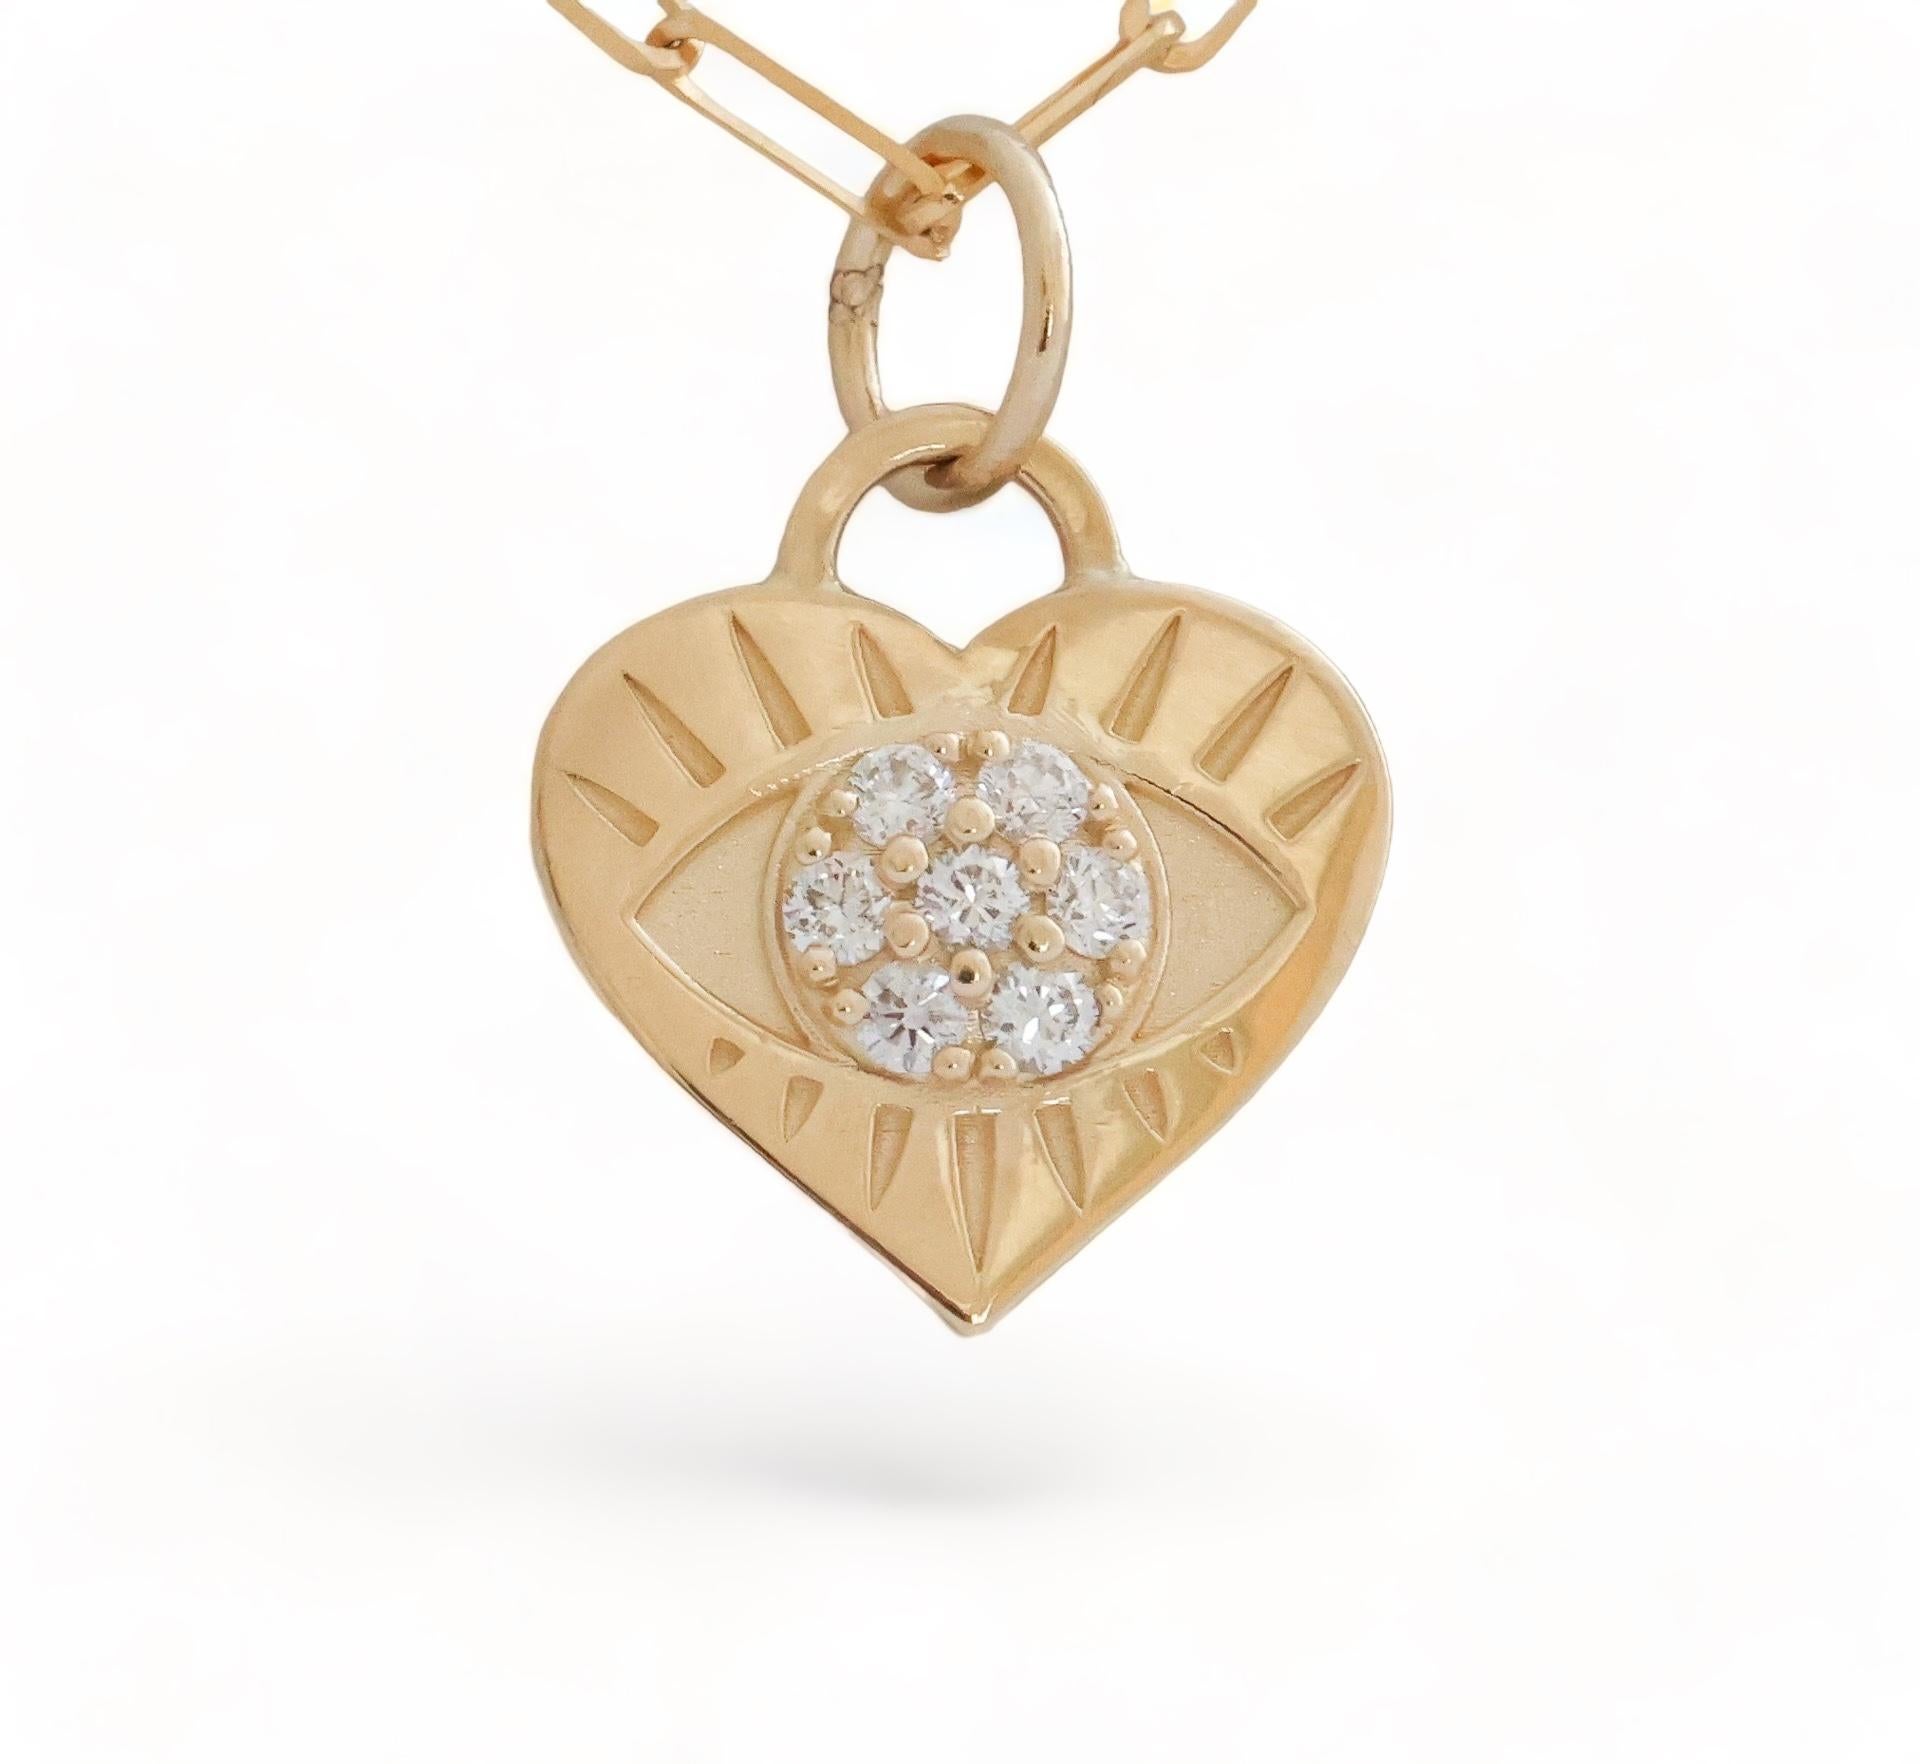 Looking for love in all the right places. The Eye Love pendant symbolize the heart that sees all. A beautiful reminder to see with our true essence of love. 
Set in 14 karat yellow gold, the Eye Love pendant features seven round diamonds that weigh